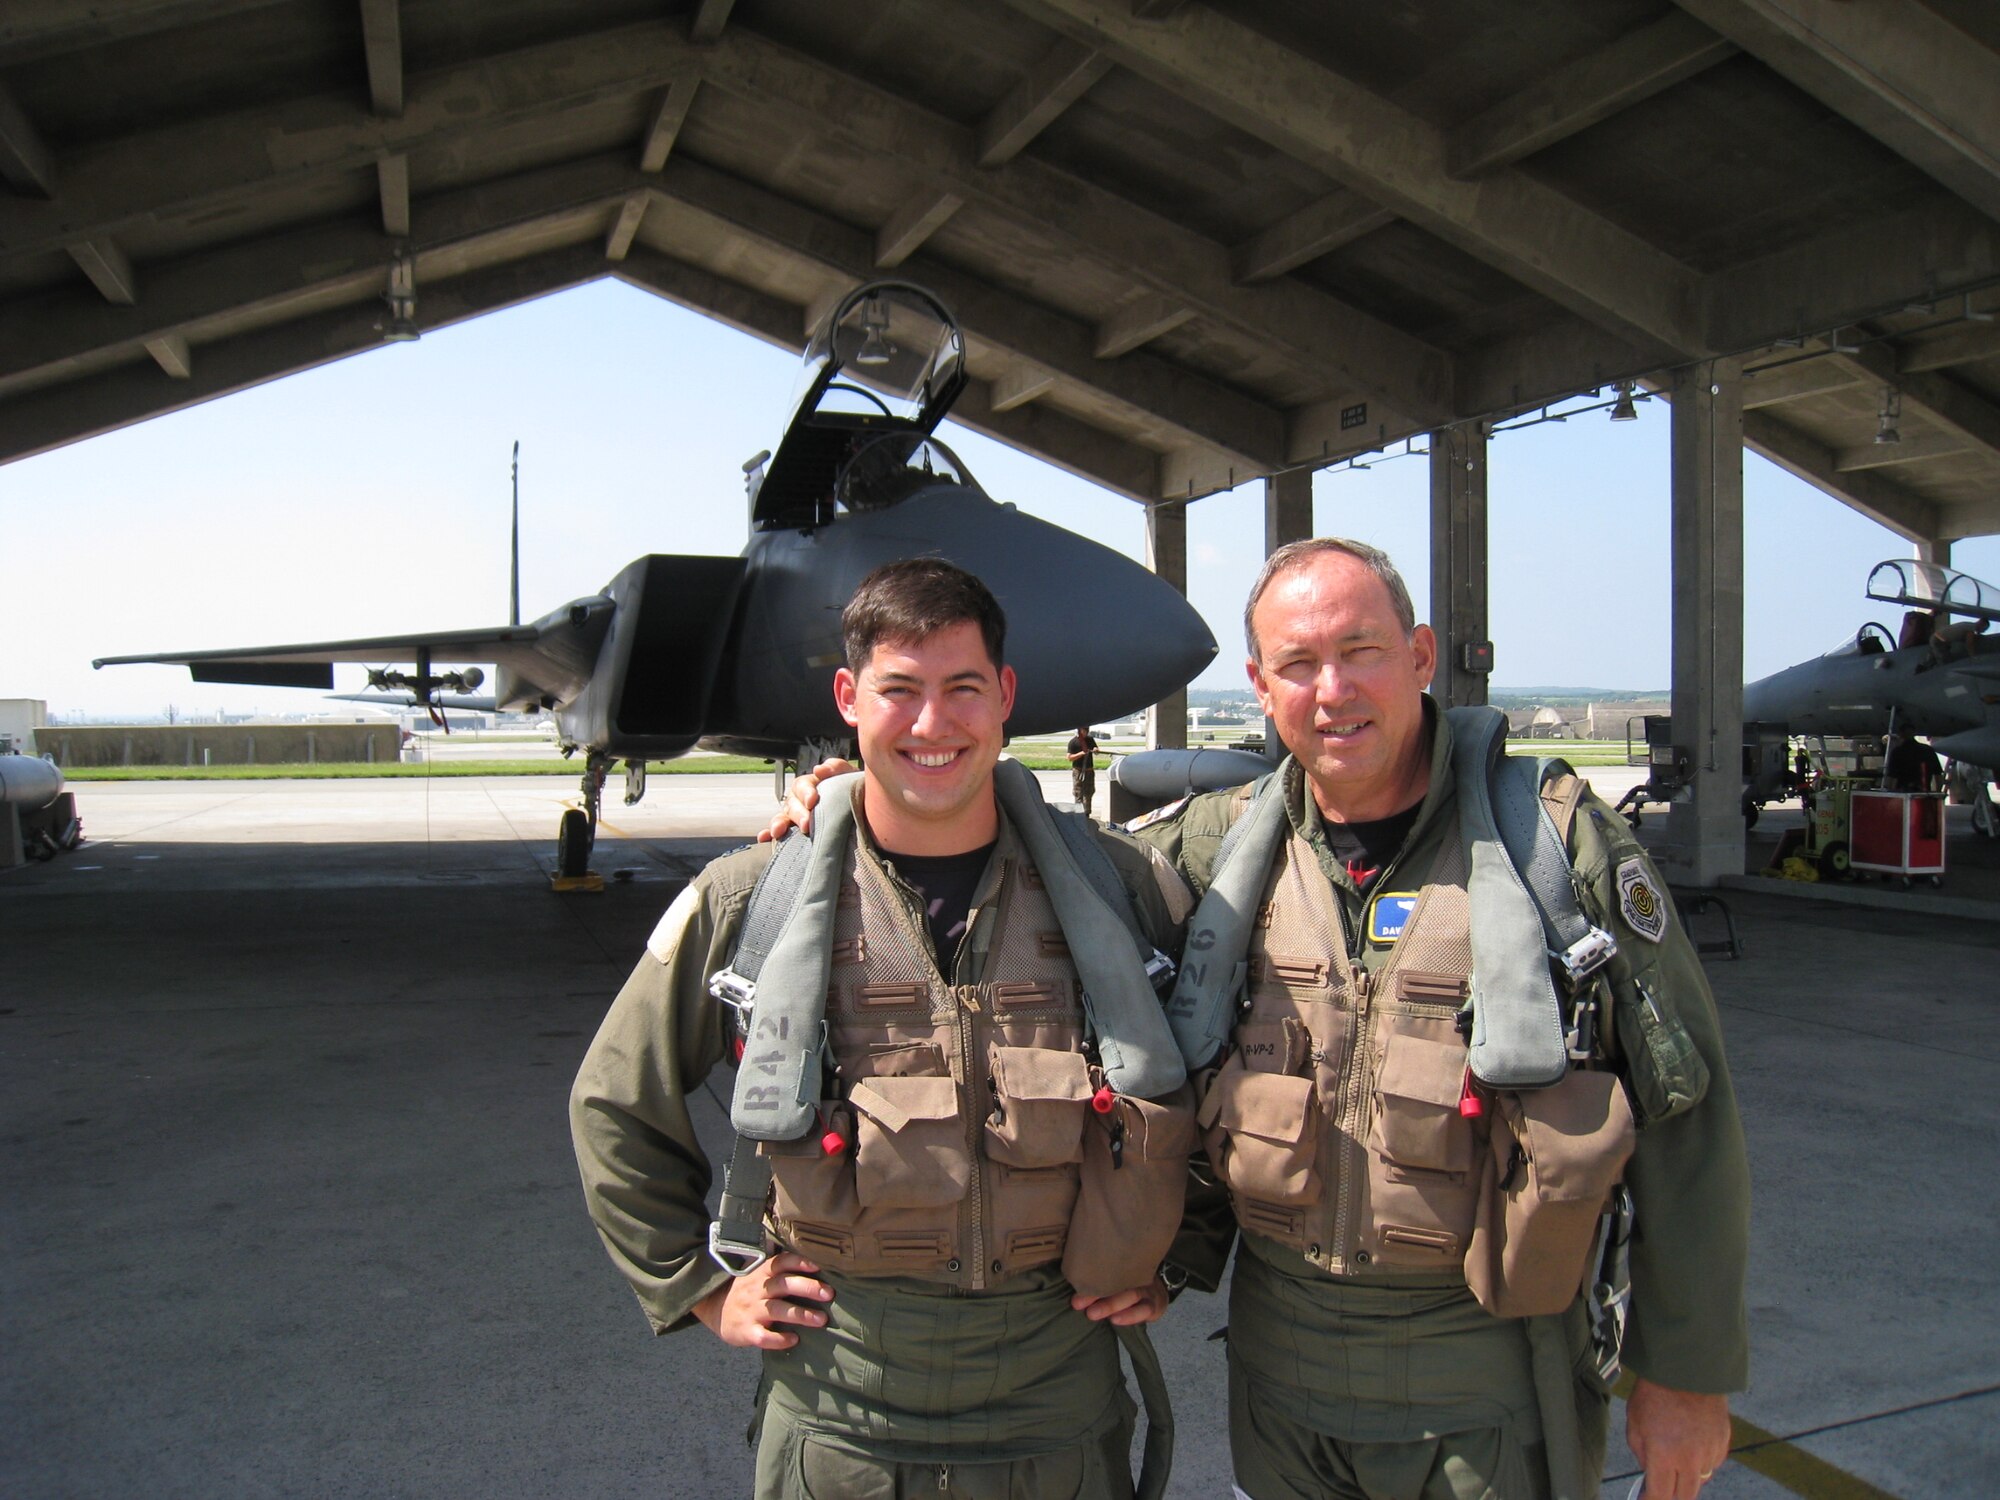 Captain David Deptula, an F-15 pilot with the 67th
Fighter Squadron and his father, Lt. Gen. David Deptula, Air Force Deputy
Chief of Staff for Intelligence, Surveillance and Reconnaissance, prepare
for an F-15 flight at Kadena Air Base, Japan, Sept. 4, 2008. General
Deptula, an F-15 pilot and a former member of the 67th Fighter Squadron
himself from 1979-1983, had the rare opportunity to fly with his son during
a trip to visit Air Force ISR professionals in the Pacific region. (Photo courtesy of U.S. Air Force) 
